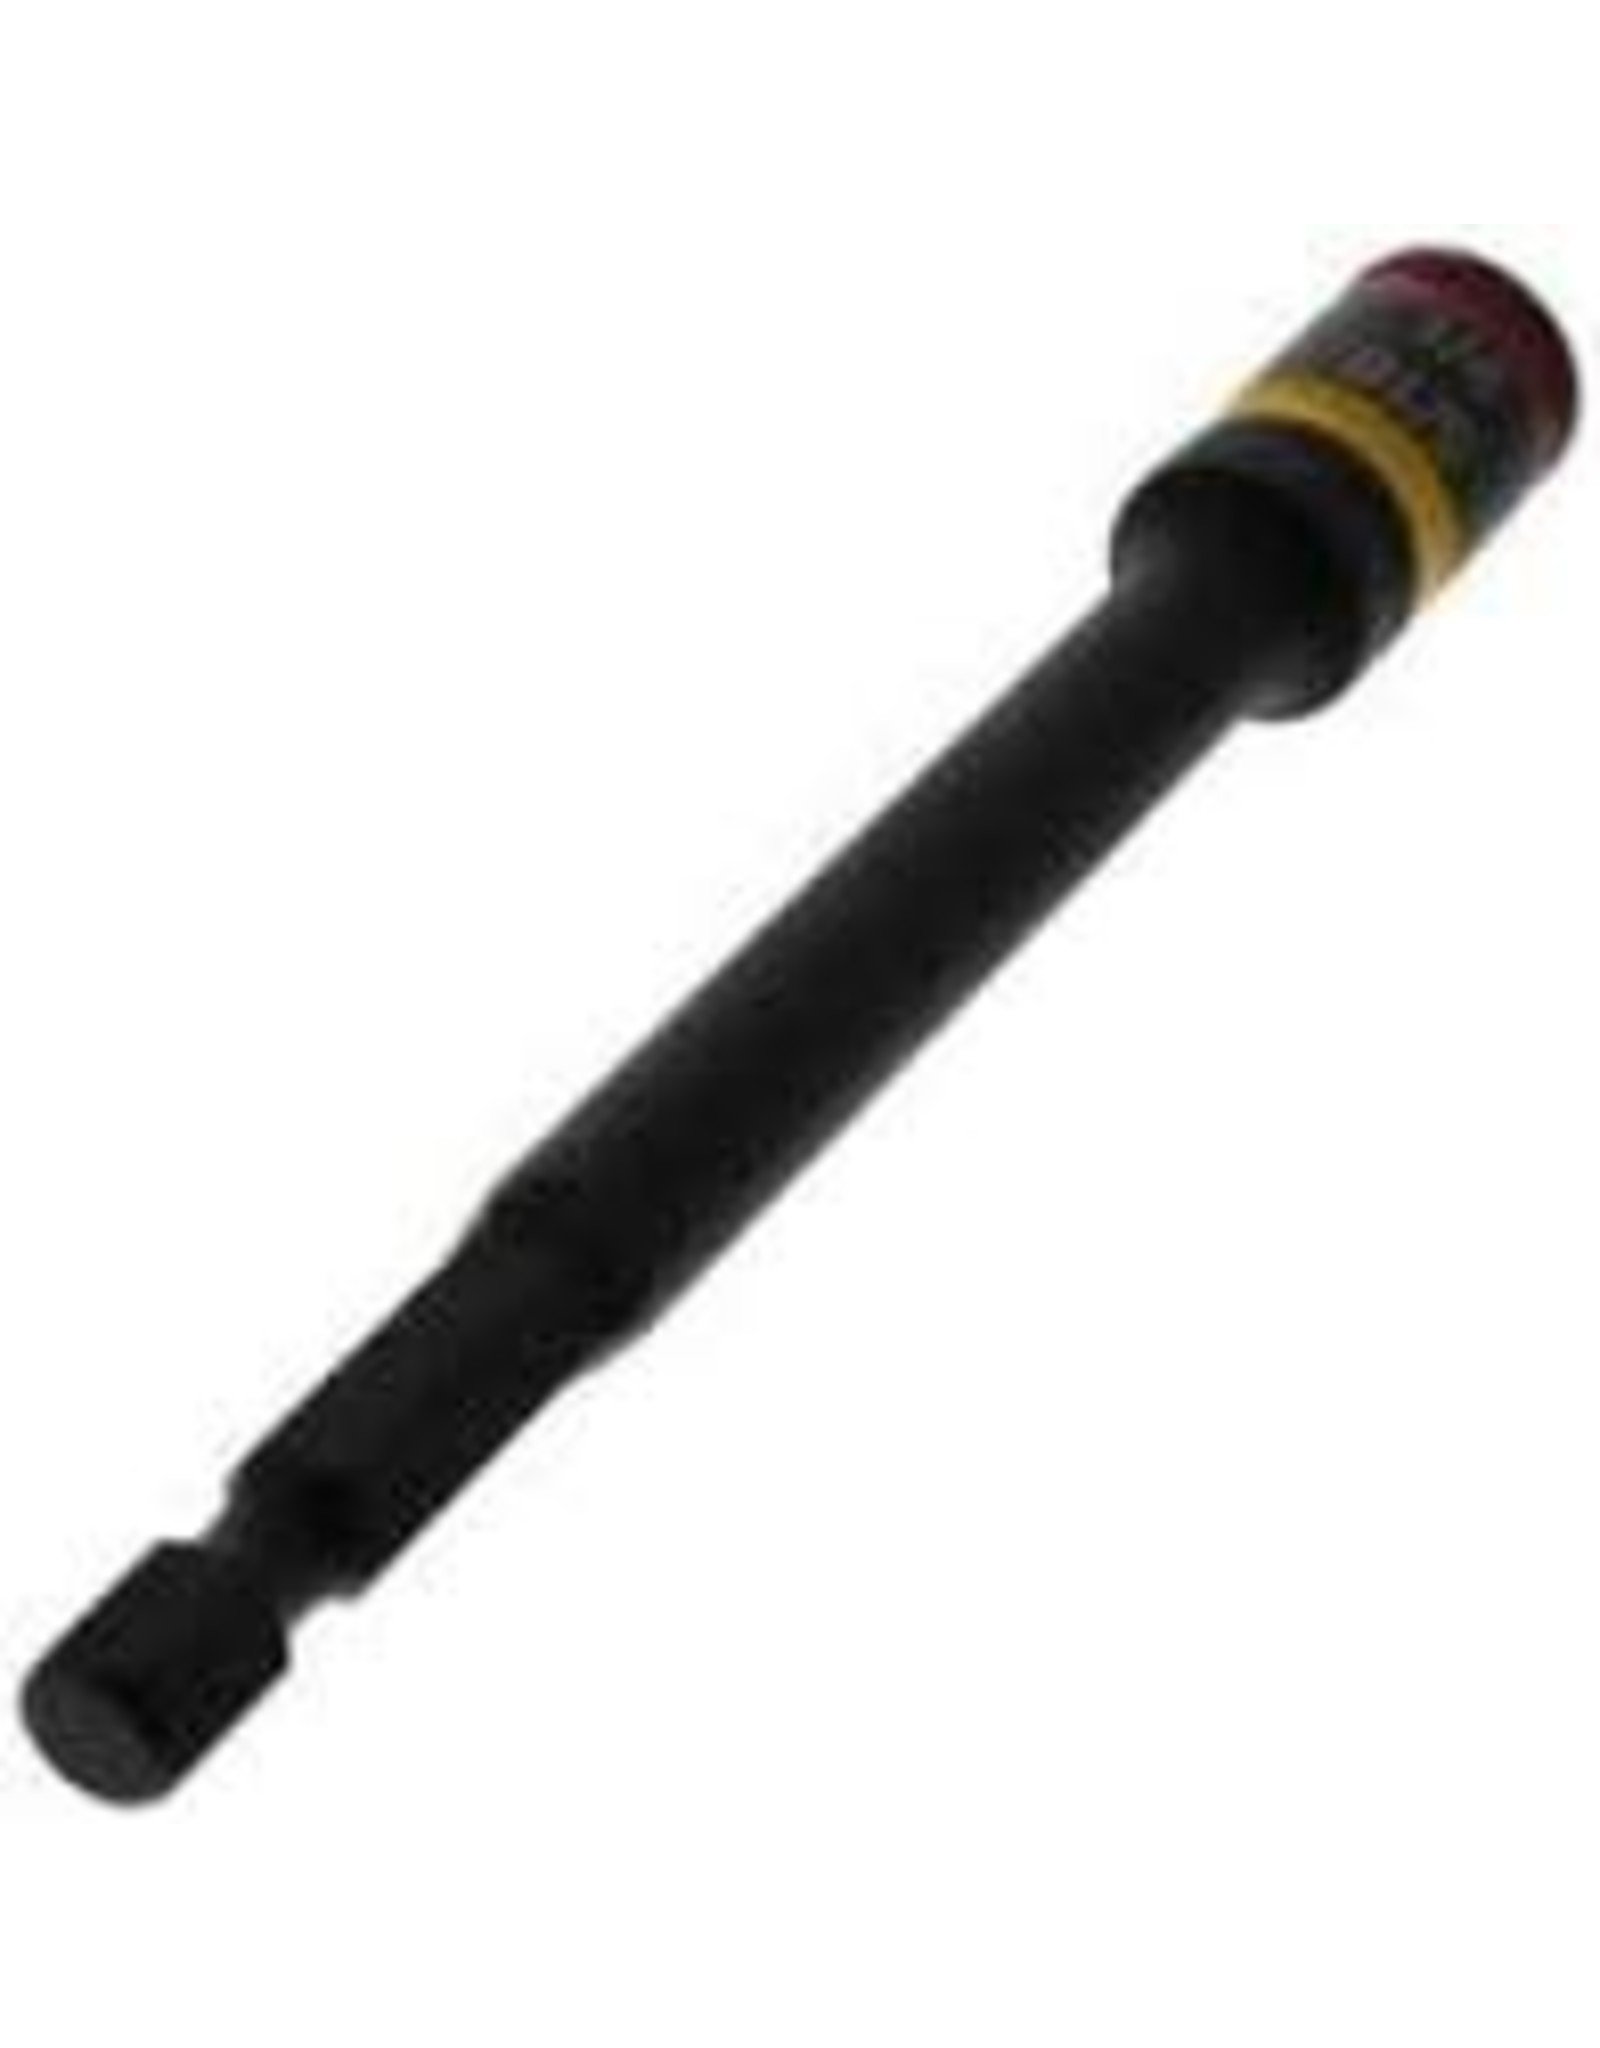 MALCO MSHMLC 4-inch Cleanable Reversible 1/4-inch and 5/16-inch Hex Driver